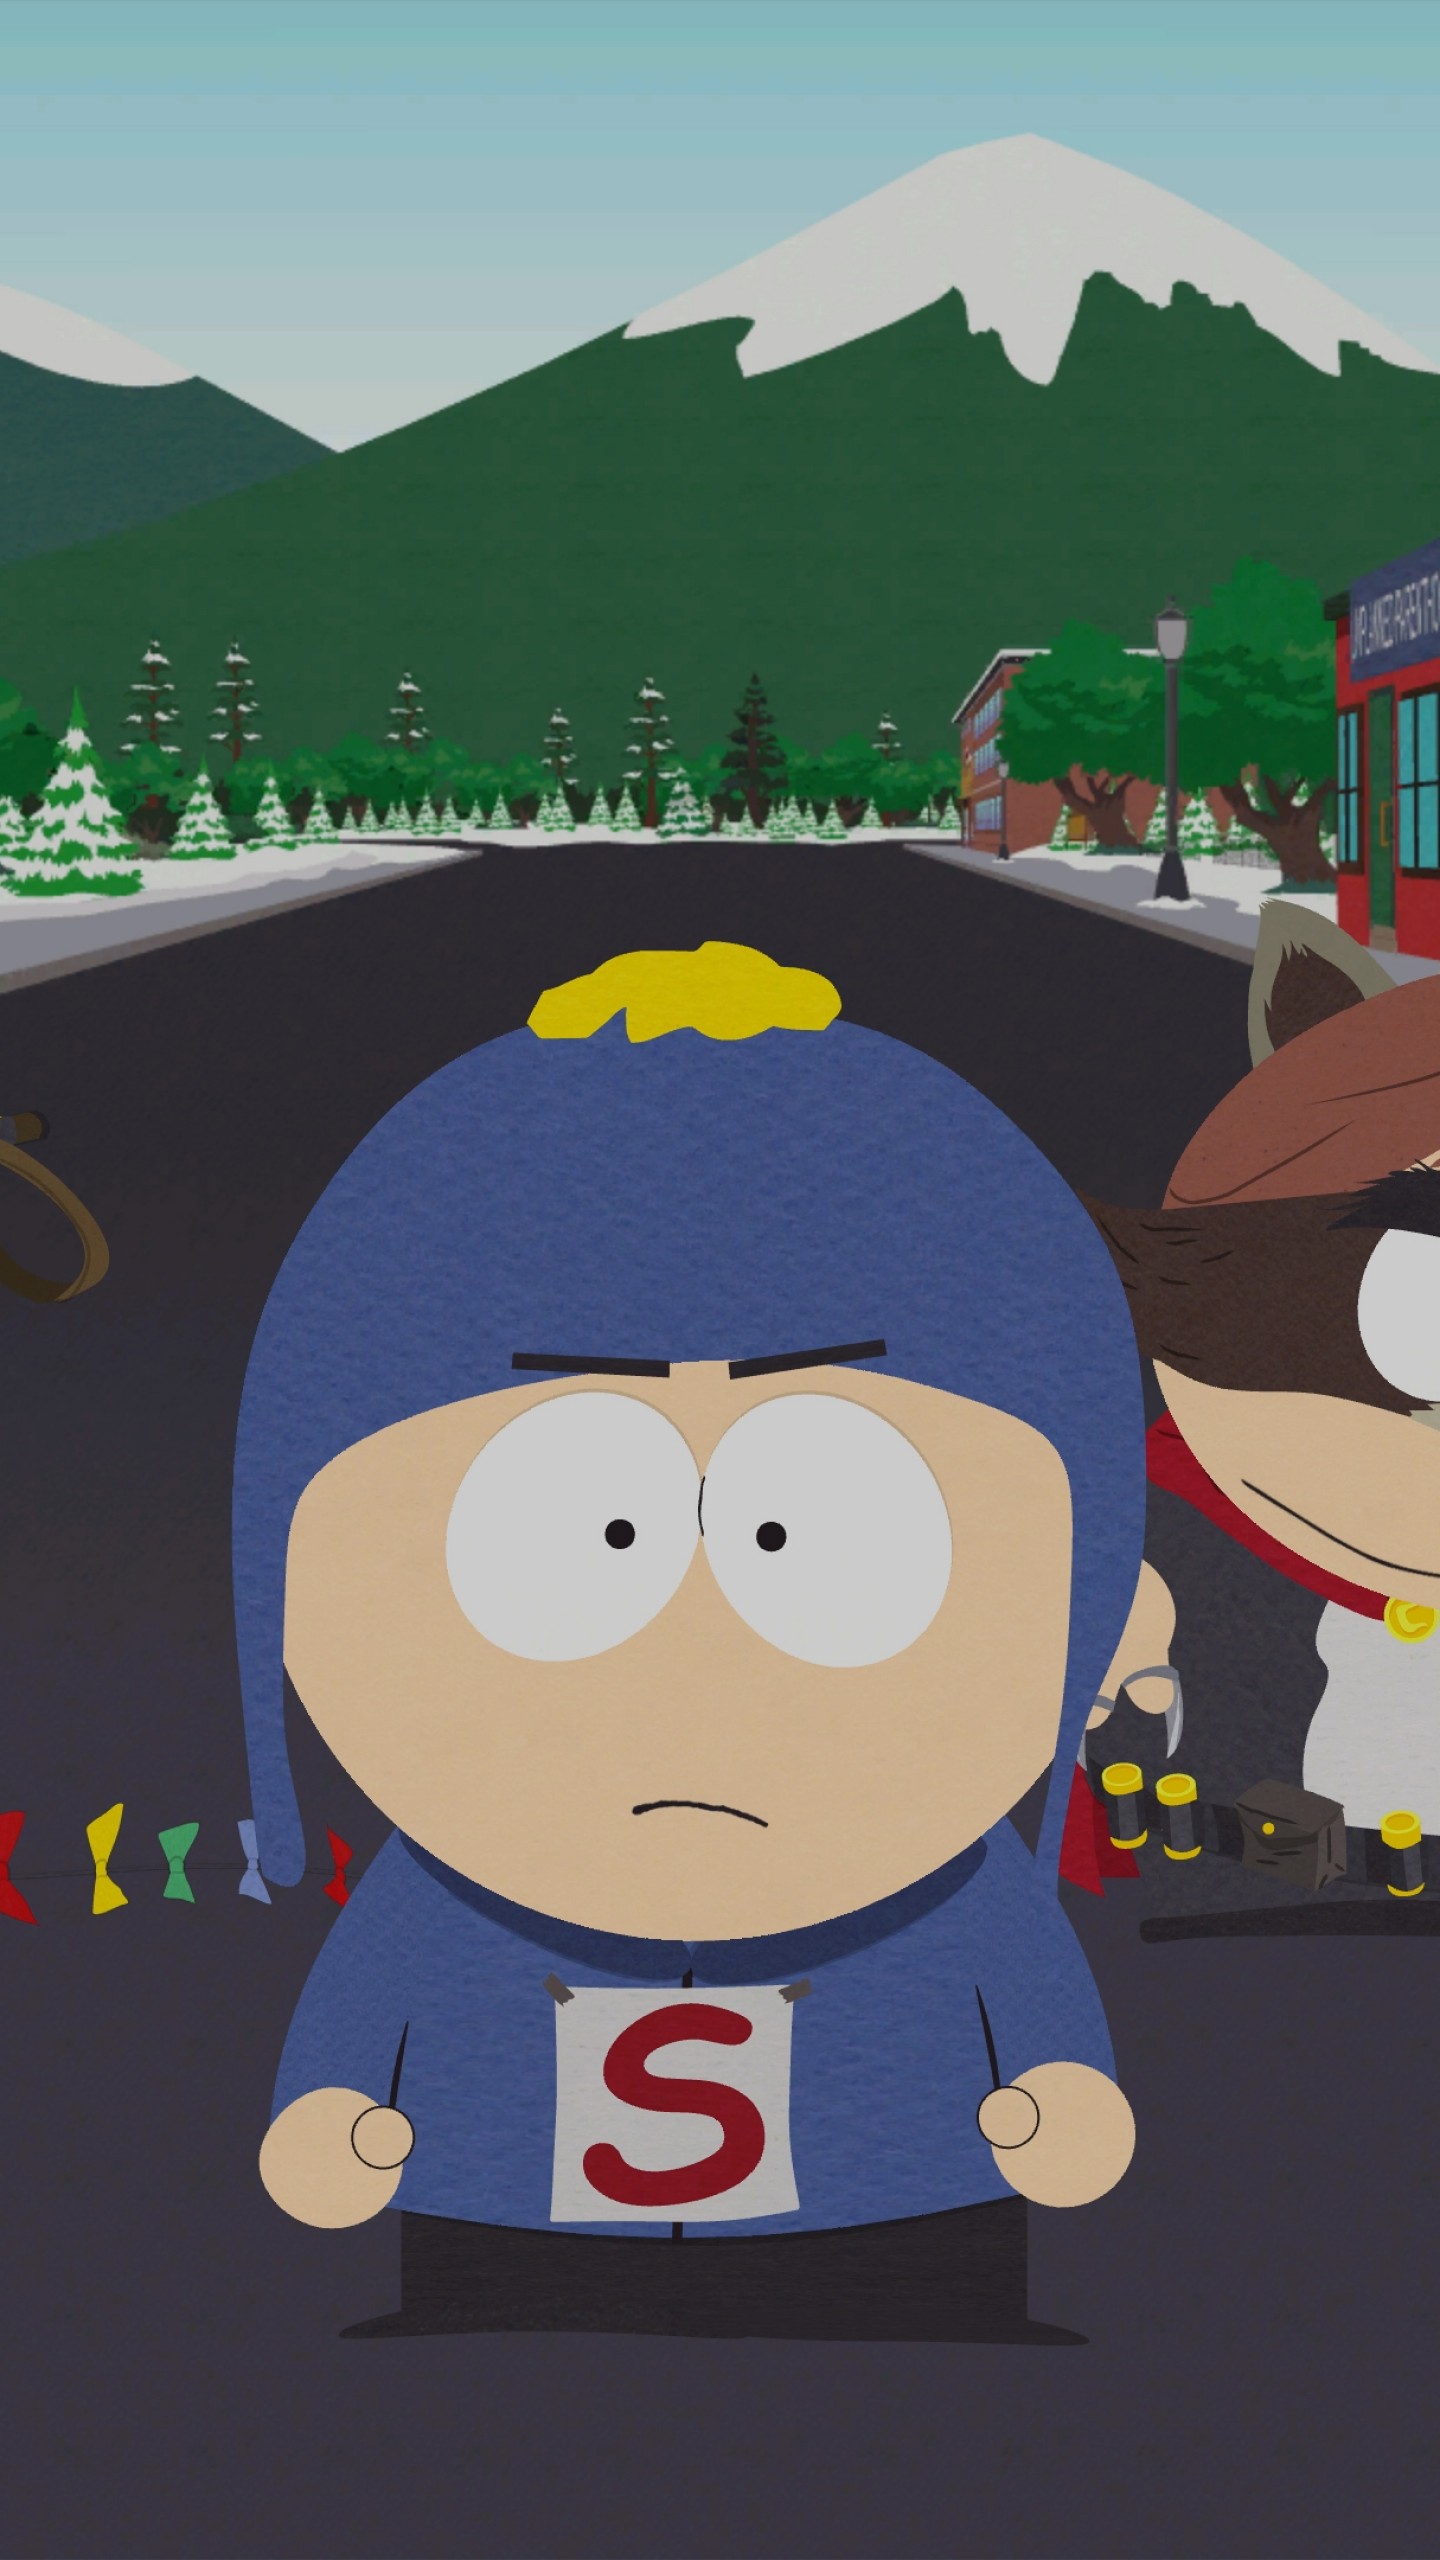 South Park Wallpapers - Barbara's HD Wallpapers